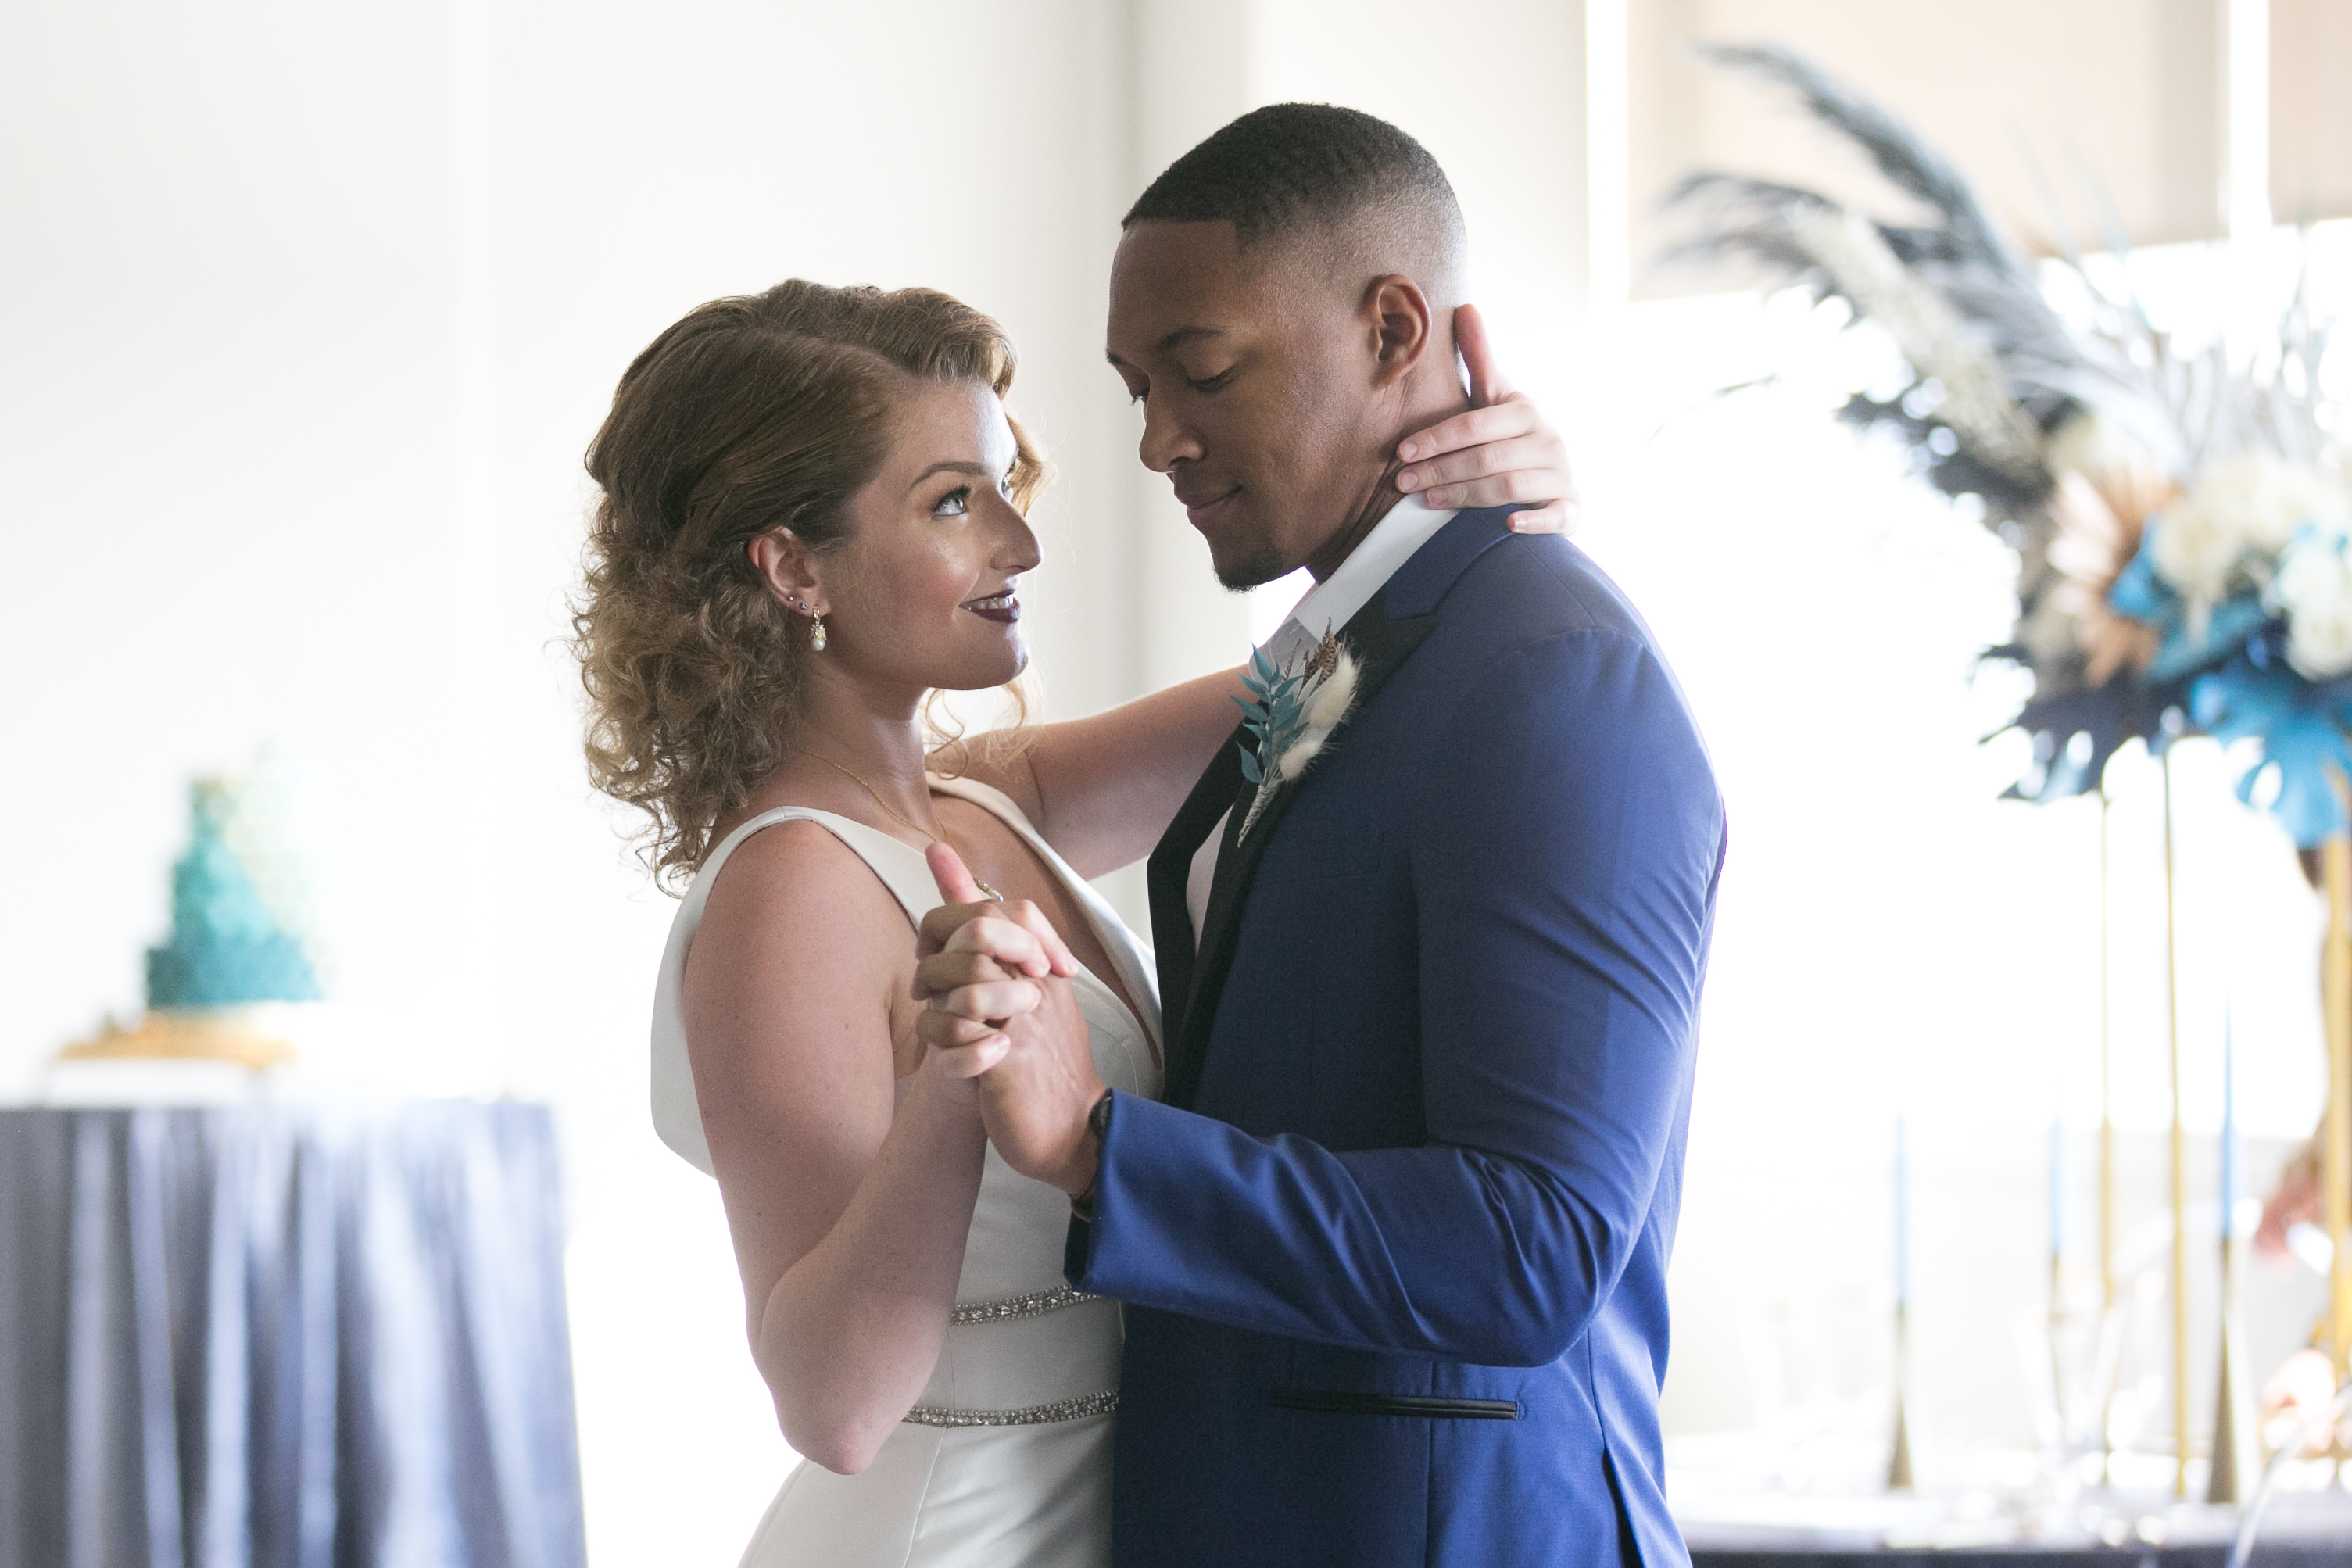 Romantic Bride and Groom Dancing Wedding Portrait | Tampa Wedding Photographer Carrie Wildes Photography | Wedding Hair and Makeup Michele Renee the Studio | Wedding Attire Truly Forever Bridal